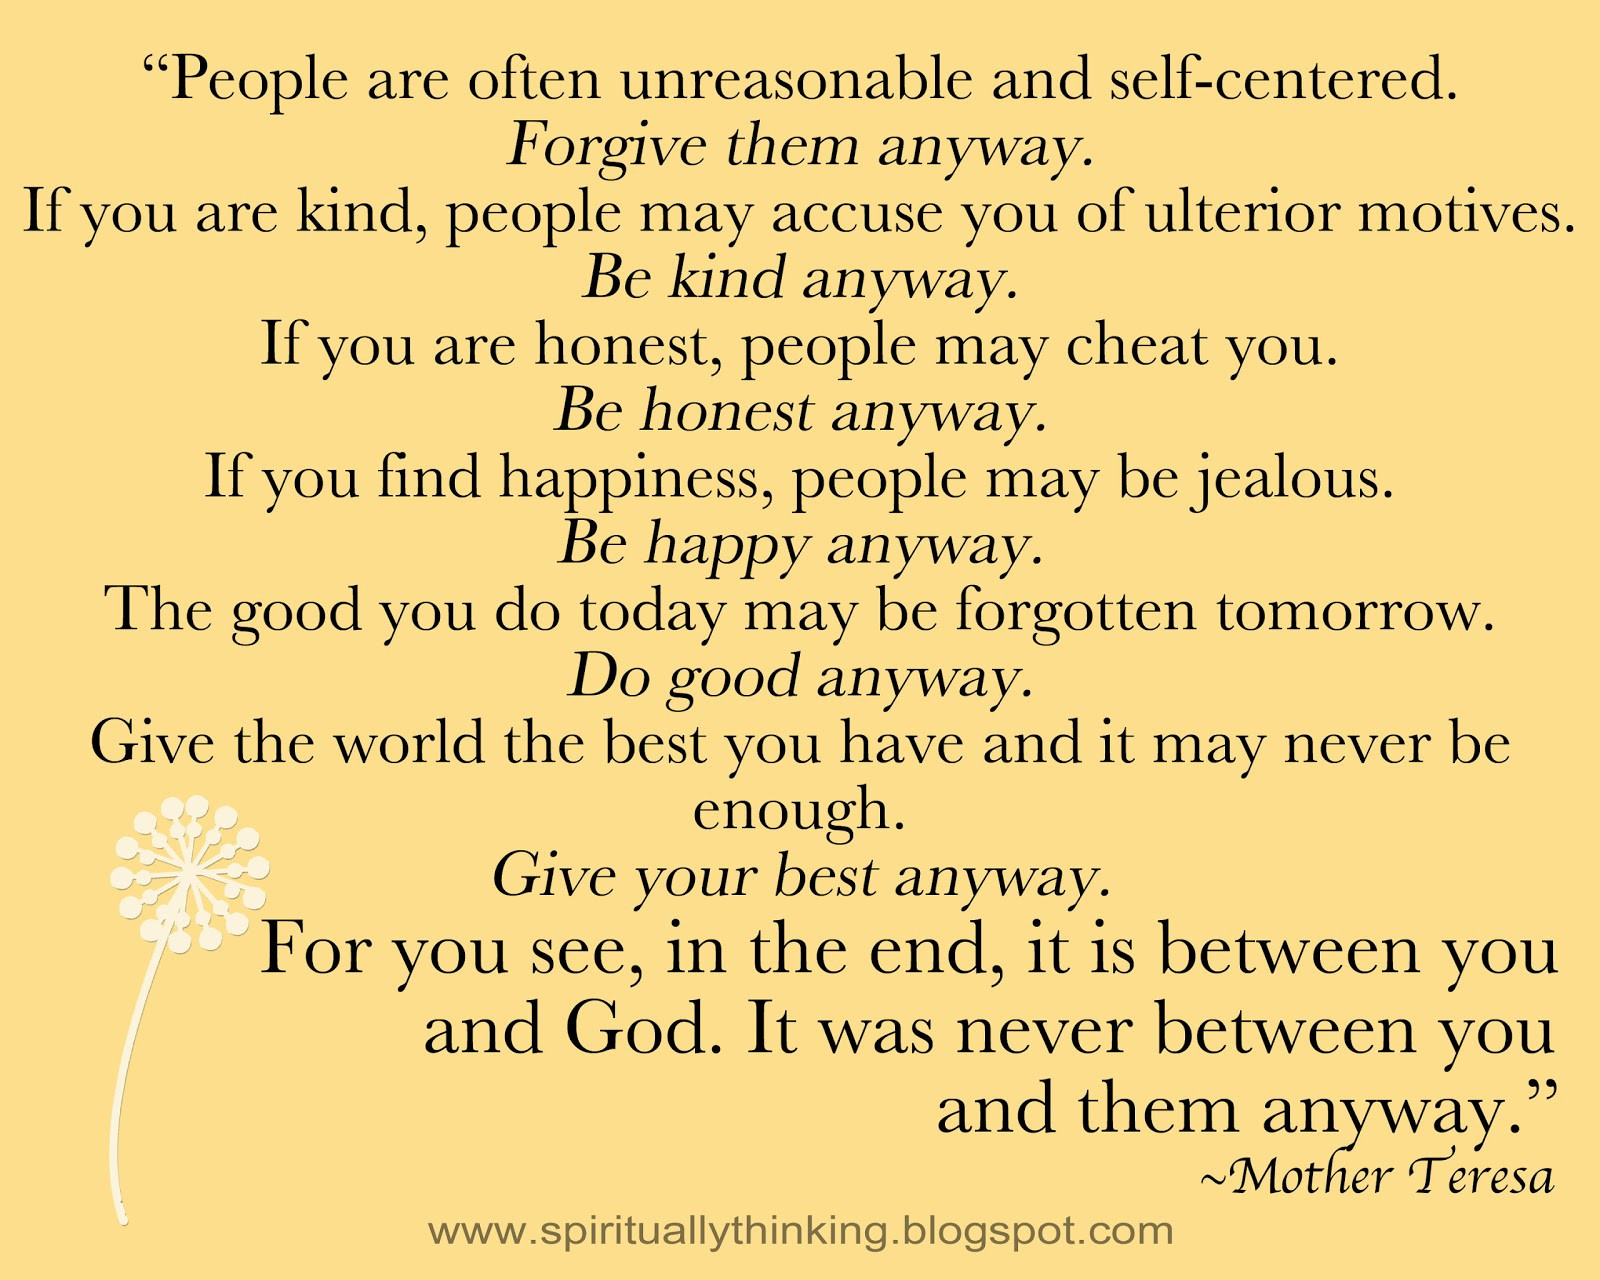 Mother Teresa Quotes On Life Do It Anyway
 and Spiritually Speaking Do it Anyway